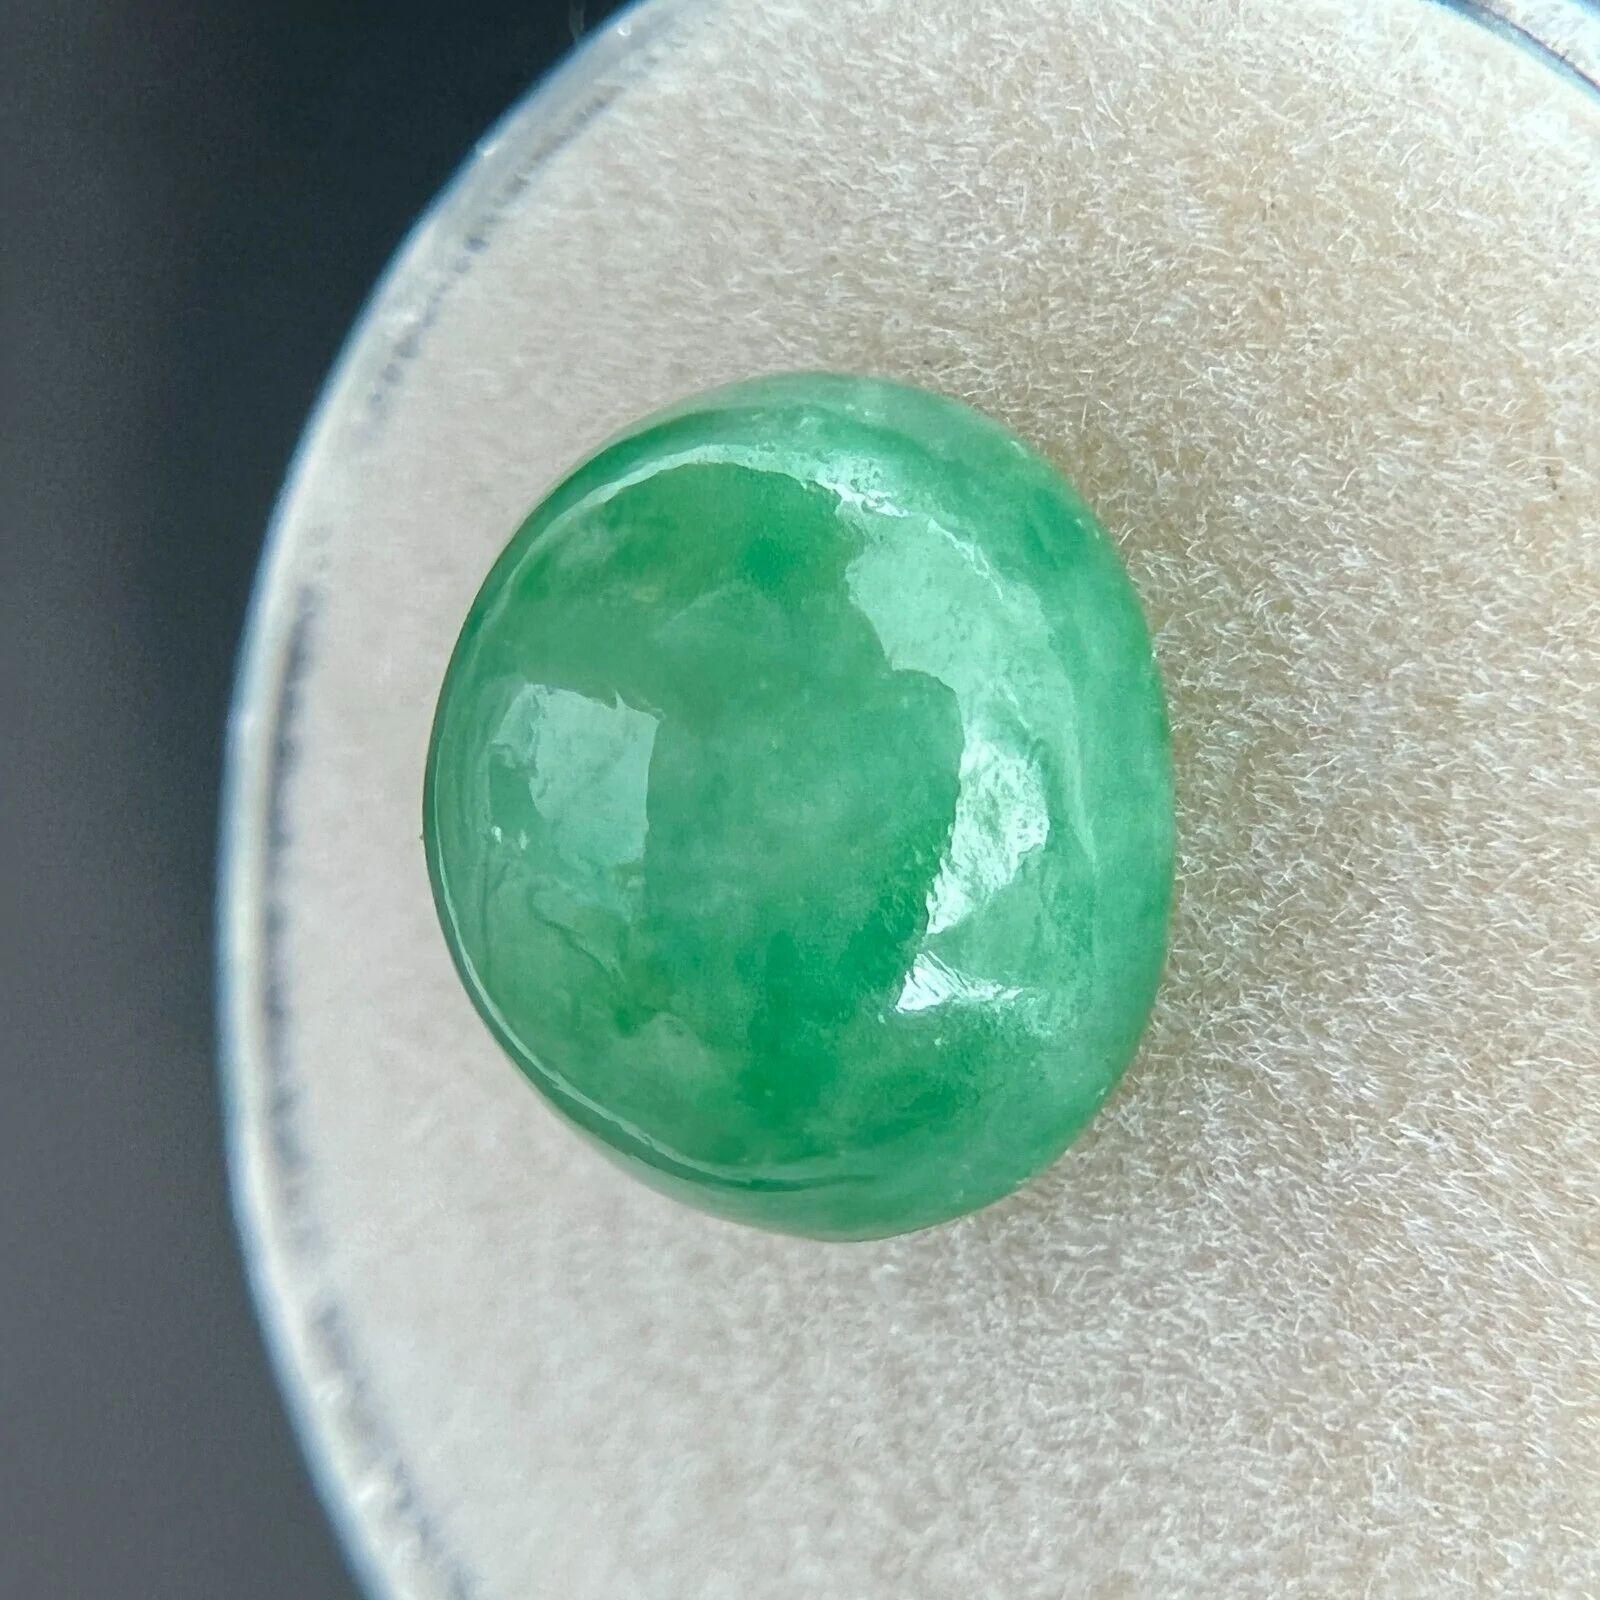 7.30ct Rare Jadeite Jade IGI Certified ‘A’ Grade Green Oval Cabochon Blister Gem

IGI Certified Untreated A Grade Jadeite Gemstone.
7.30 Carat with an excellent oval cabochon cut. Fully certified by IGI in Antwerp, one of their best and most well